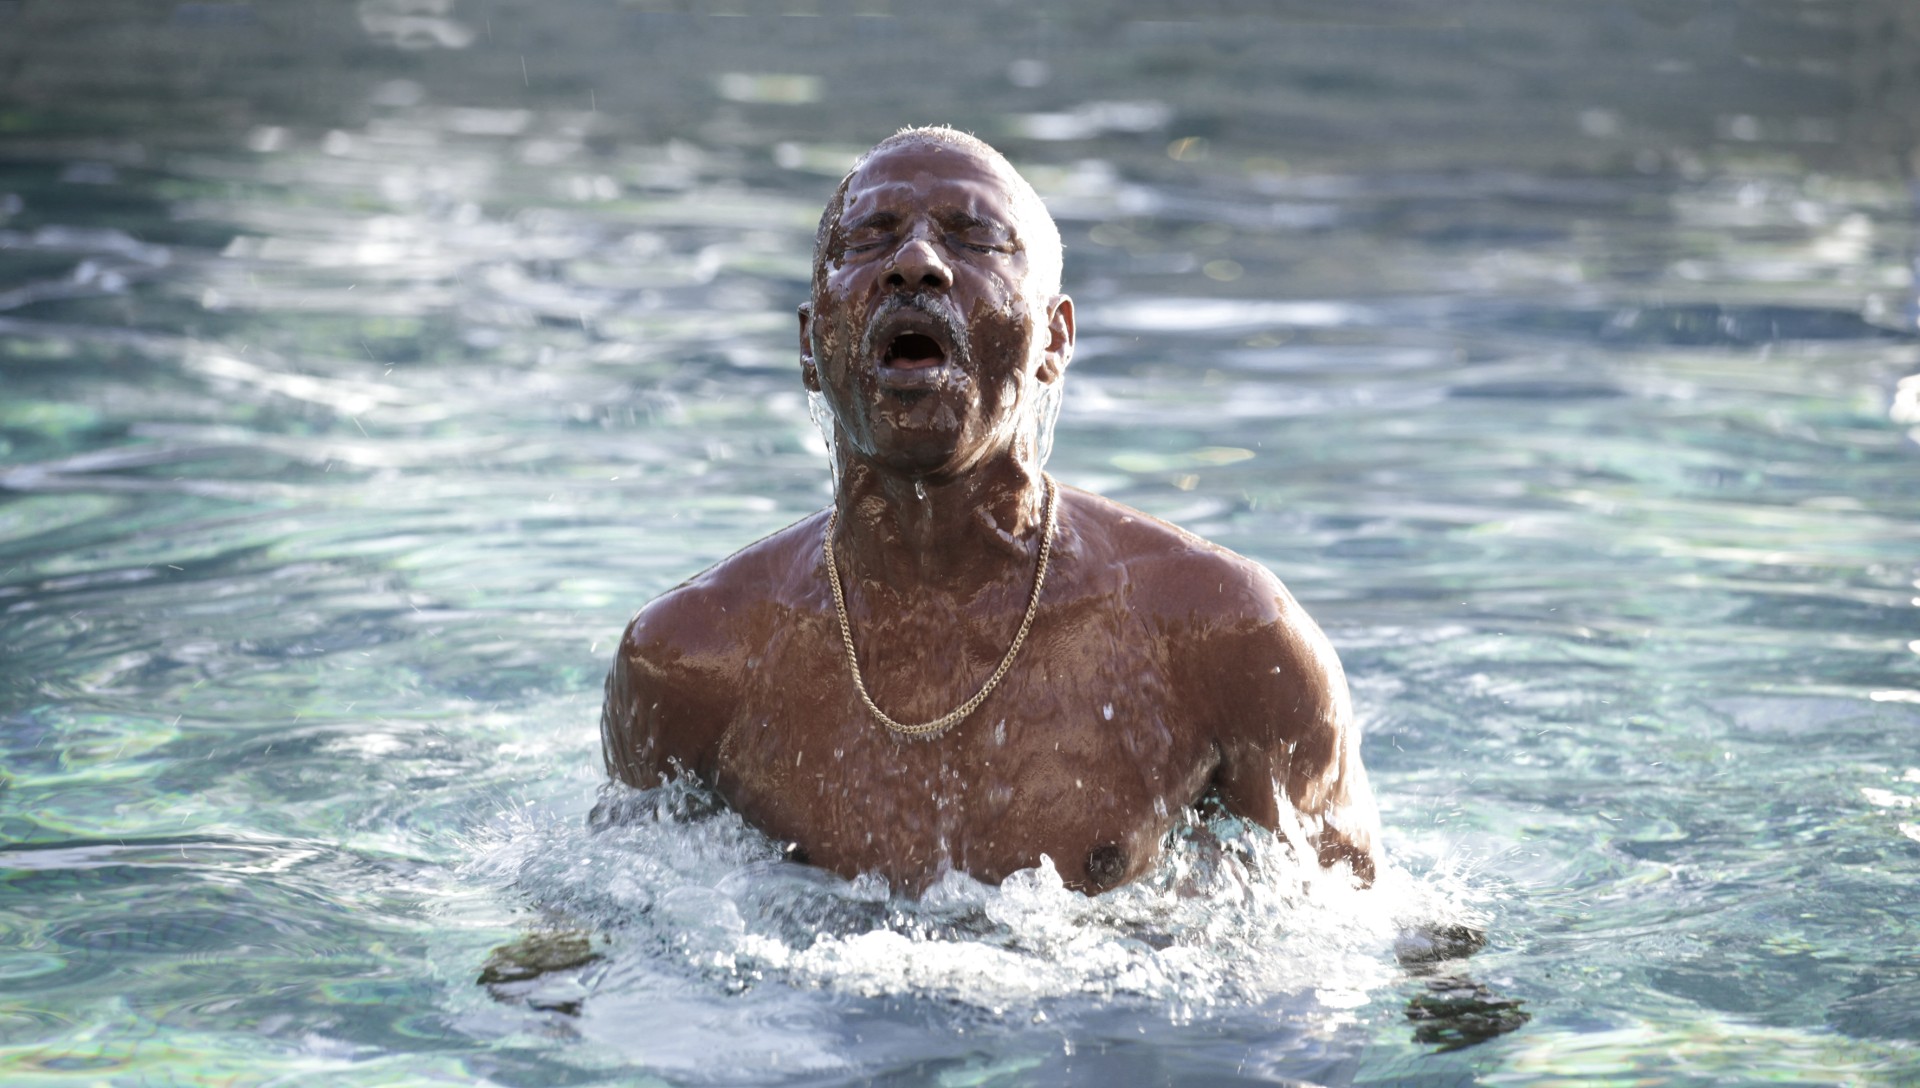 A Black person emerges from the water shirtless, wearing a gold chain, their eyes closed.